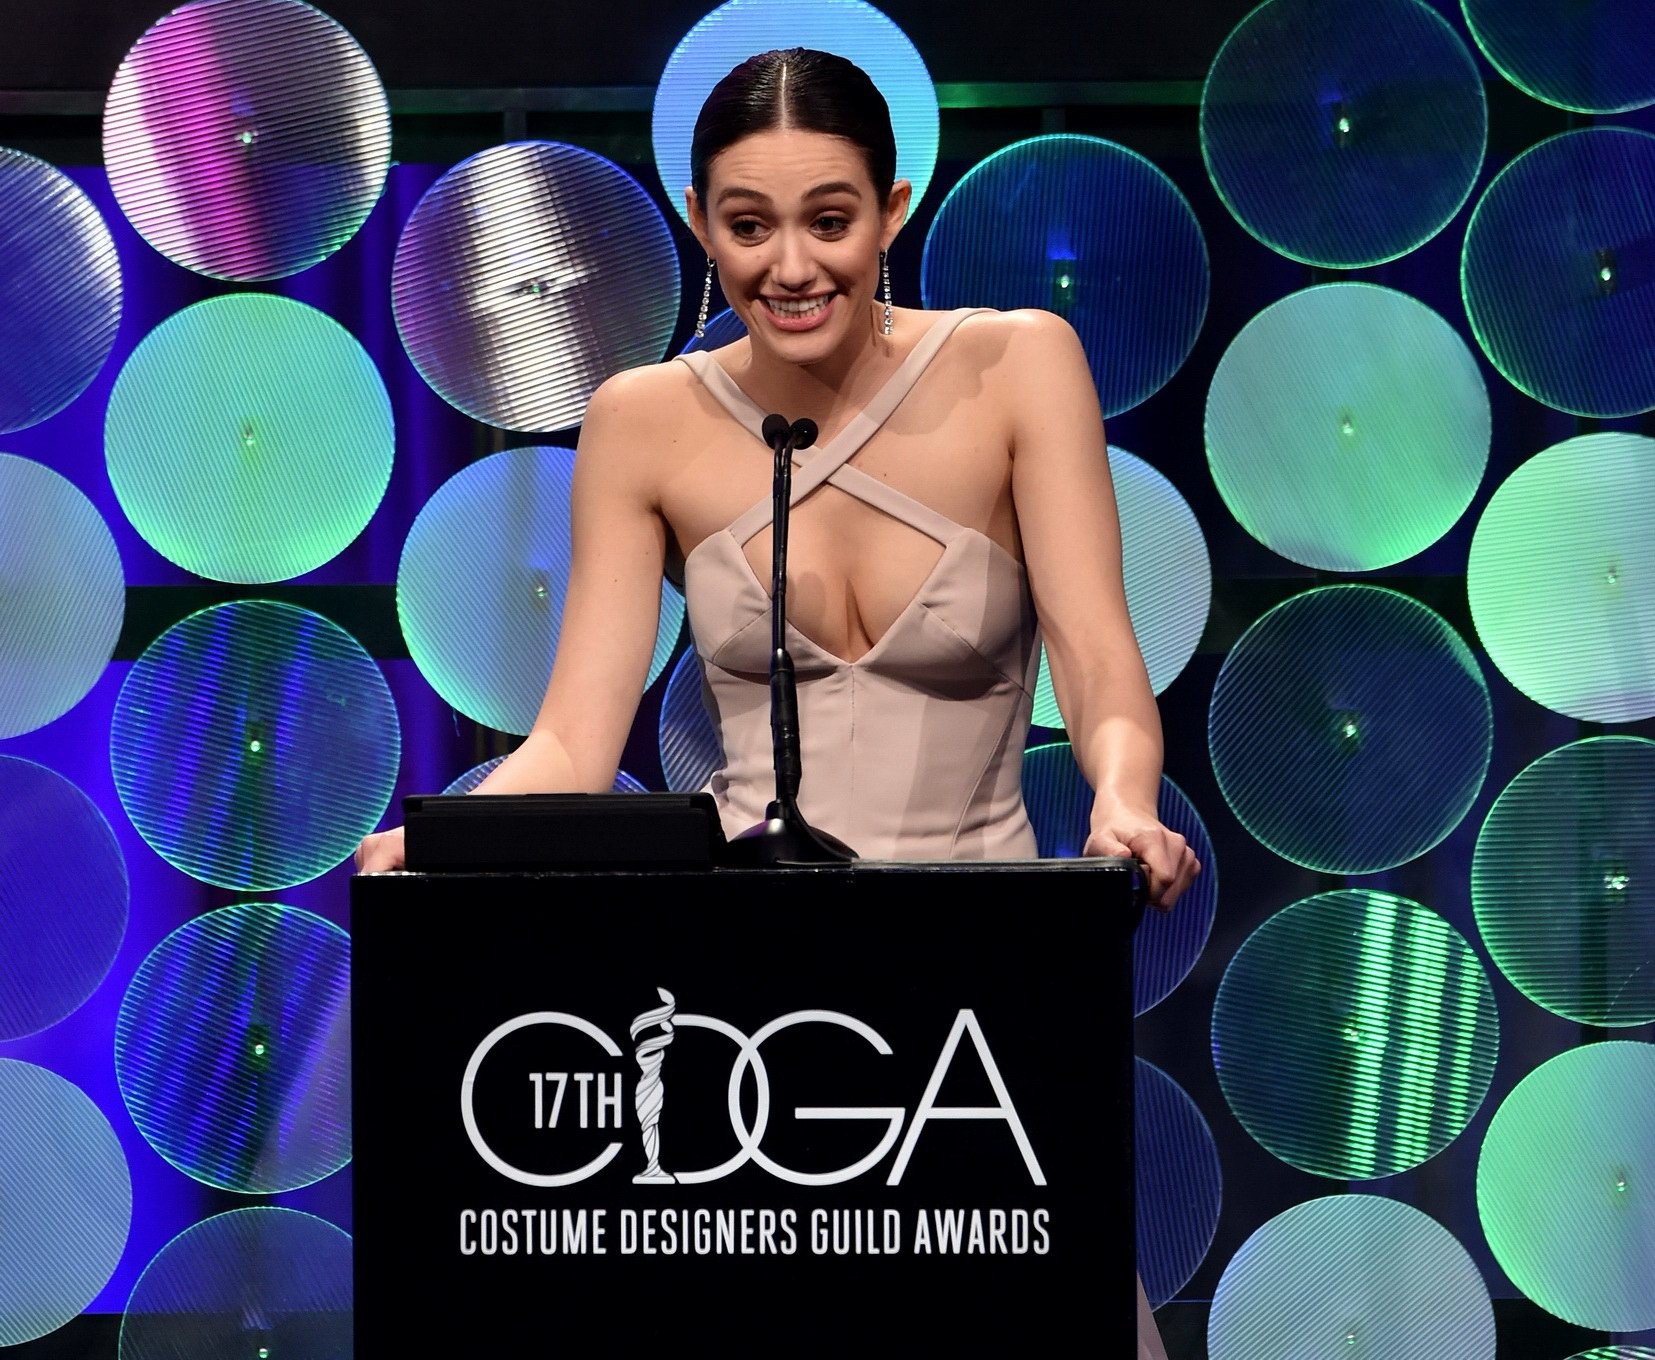 Emmy Rossum showing huge cleavage at the 17th Costume Designers Guild Awards in  #75172458